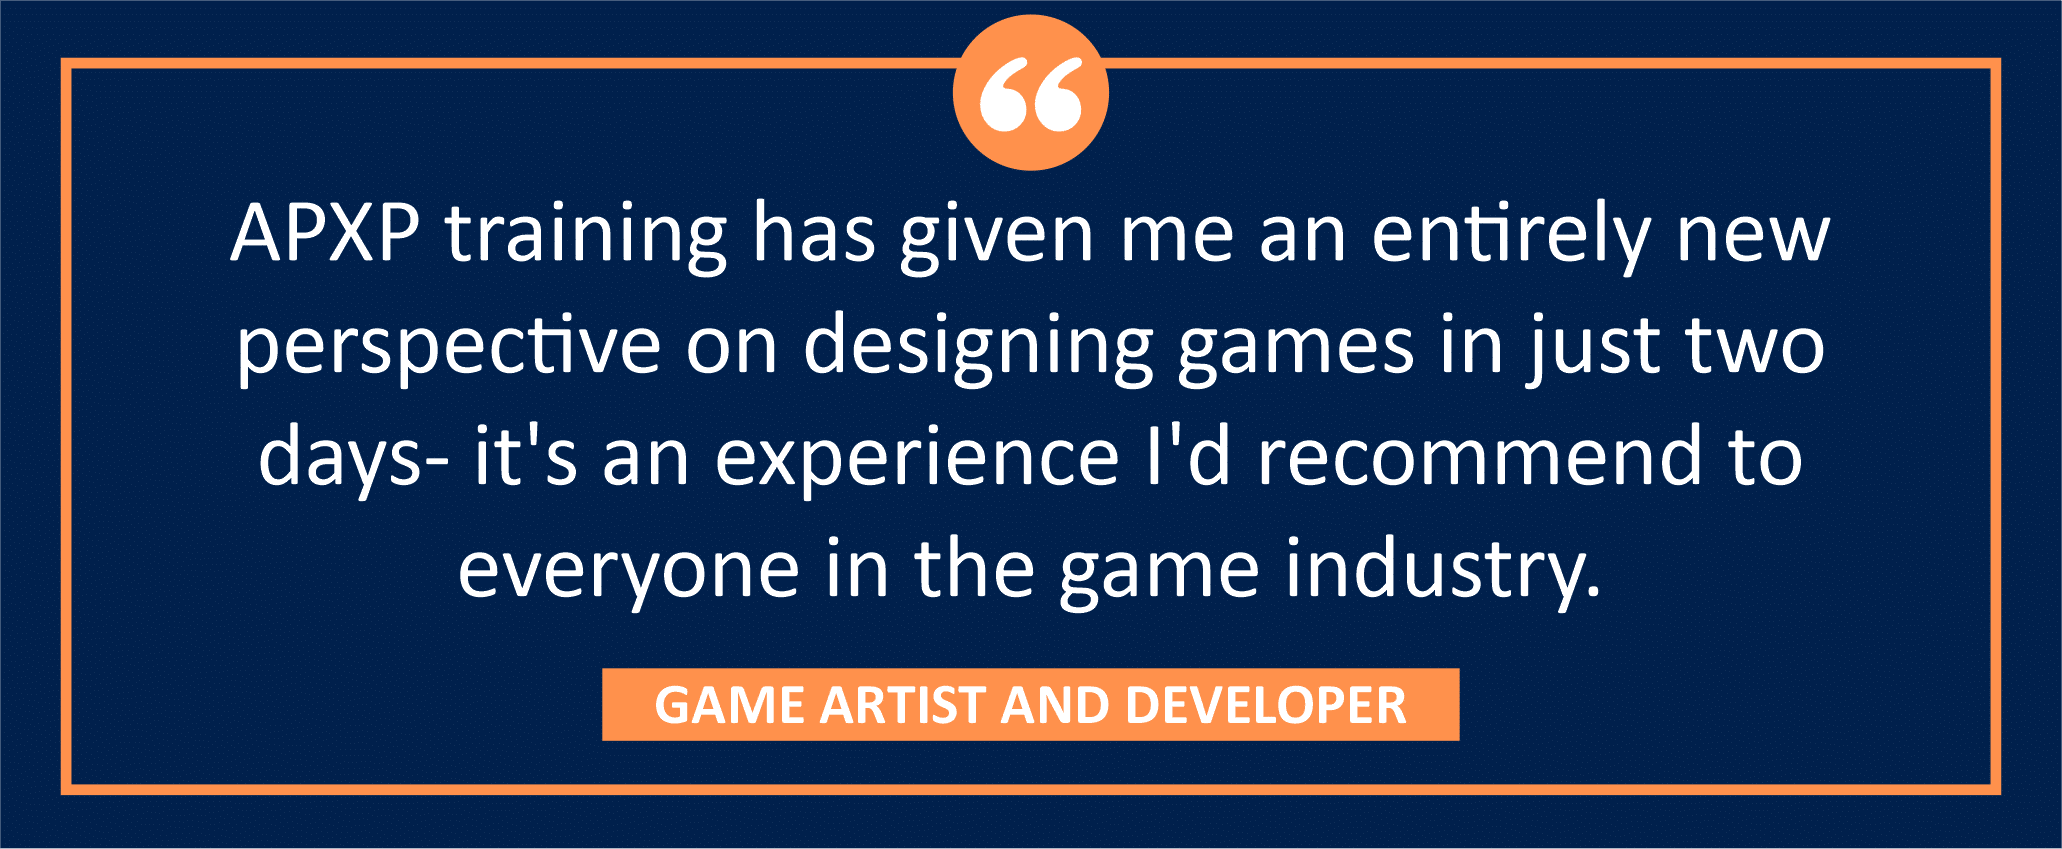 testimonial block - A GAME ARTIST AND DEVELOPER wrote, "APXP training has given me an entirely new perspective on designing games in just two days- it's an experience I'd recommend to everyone in the game industry."